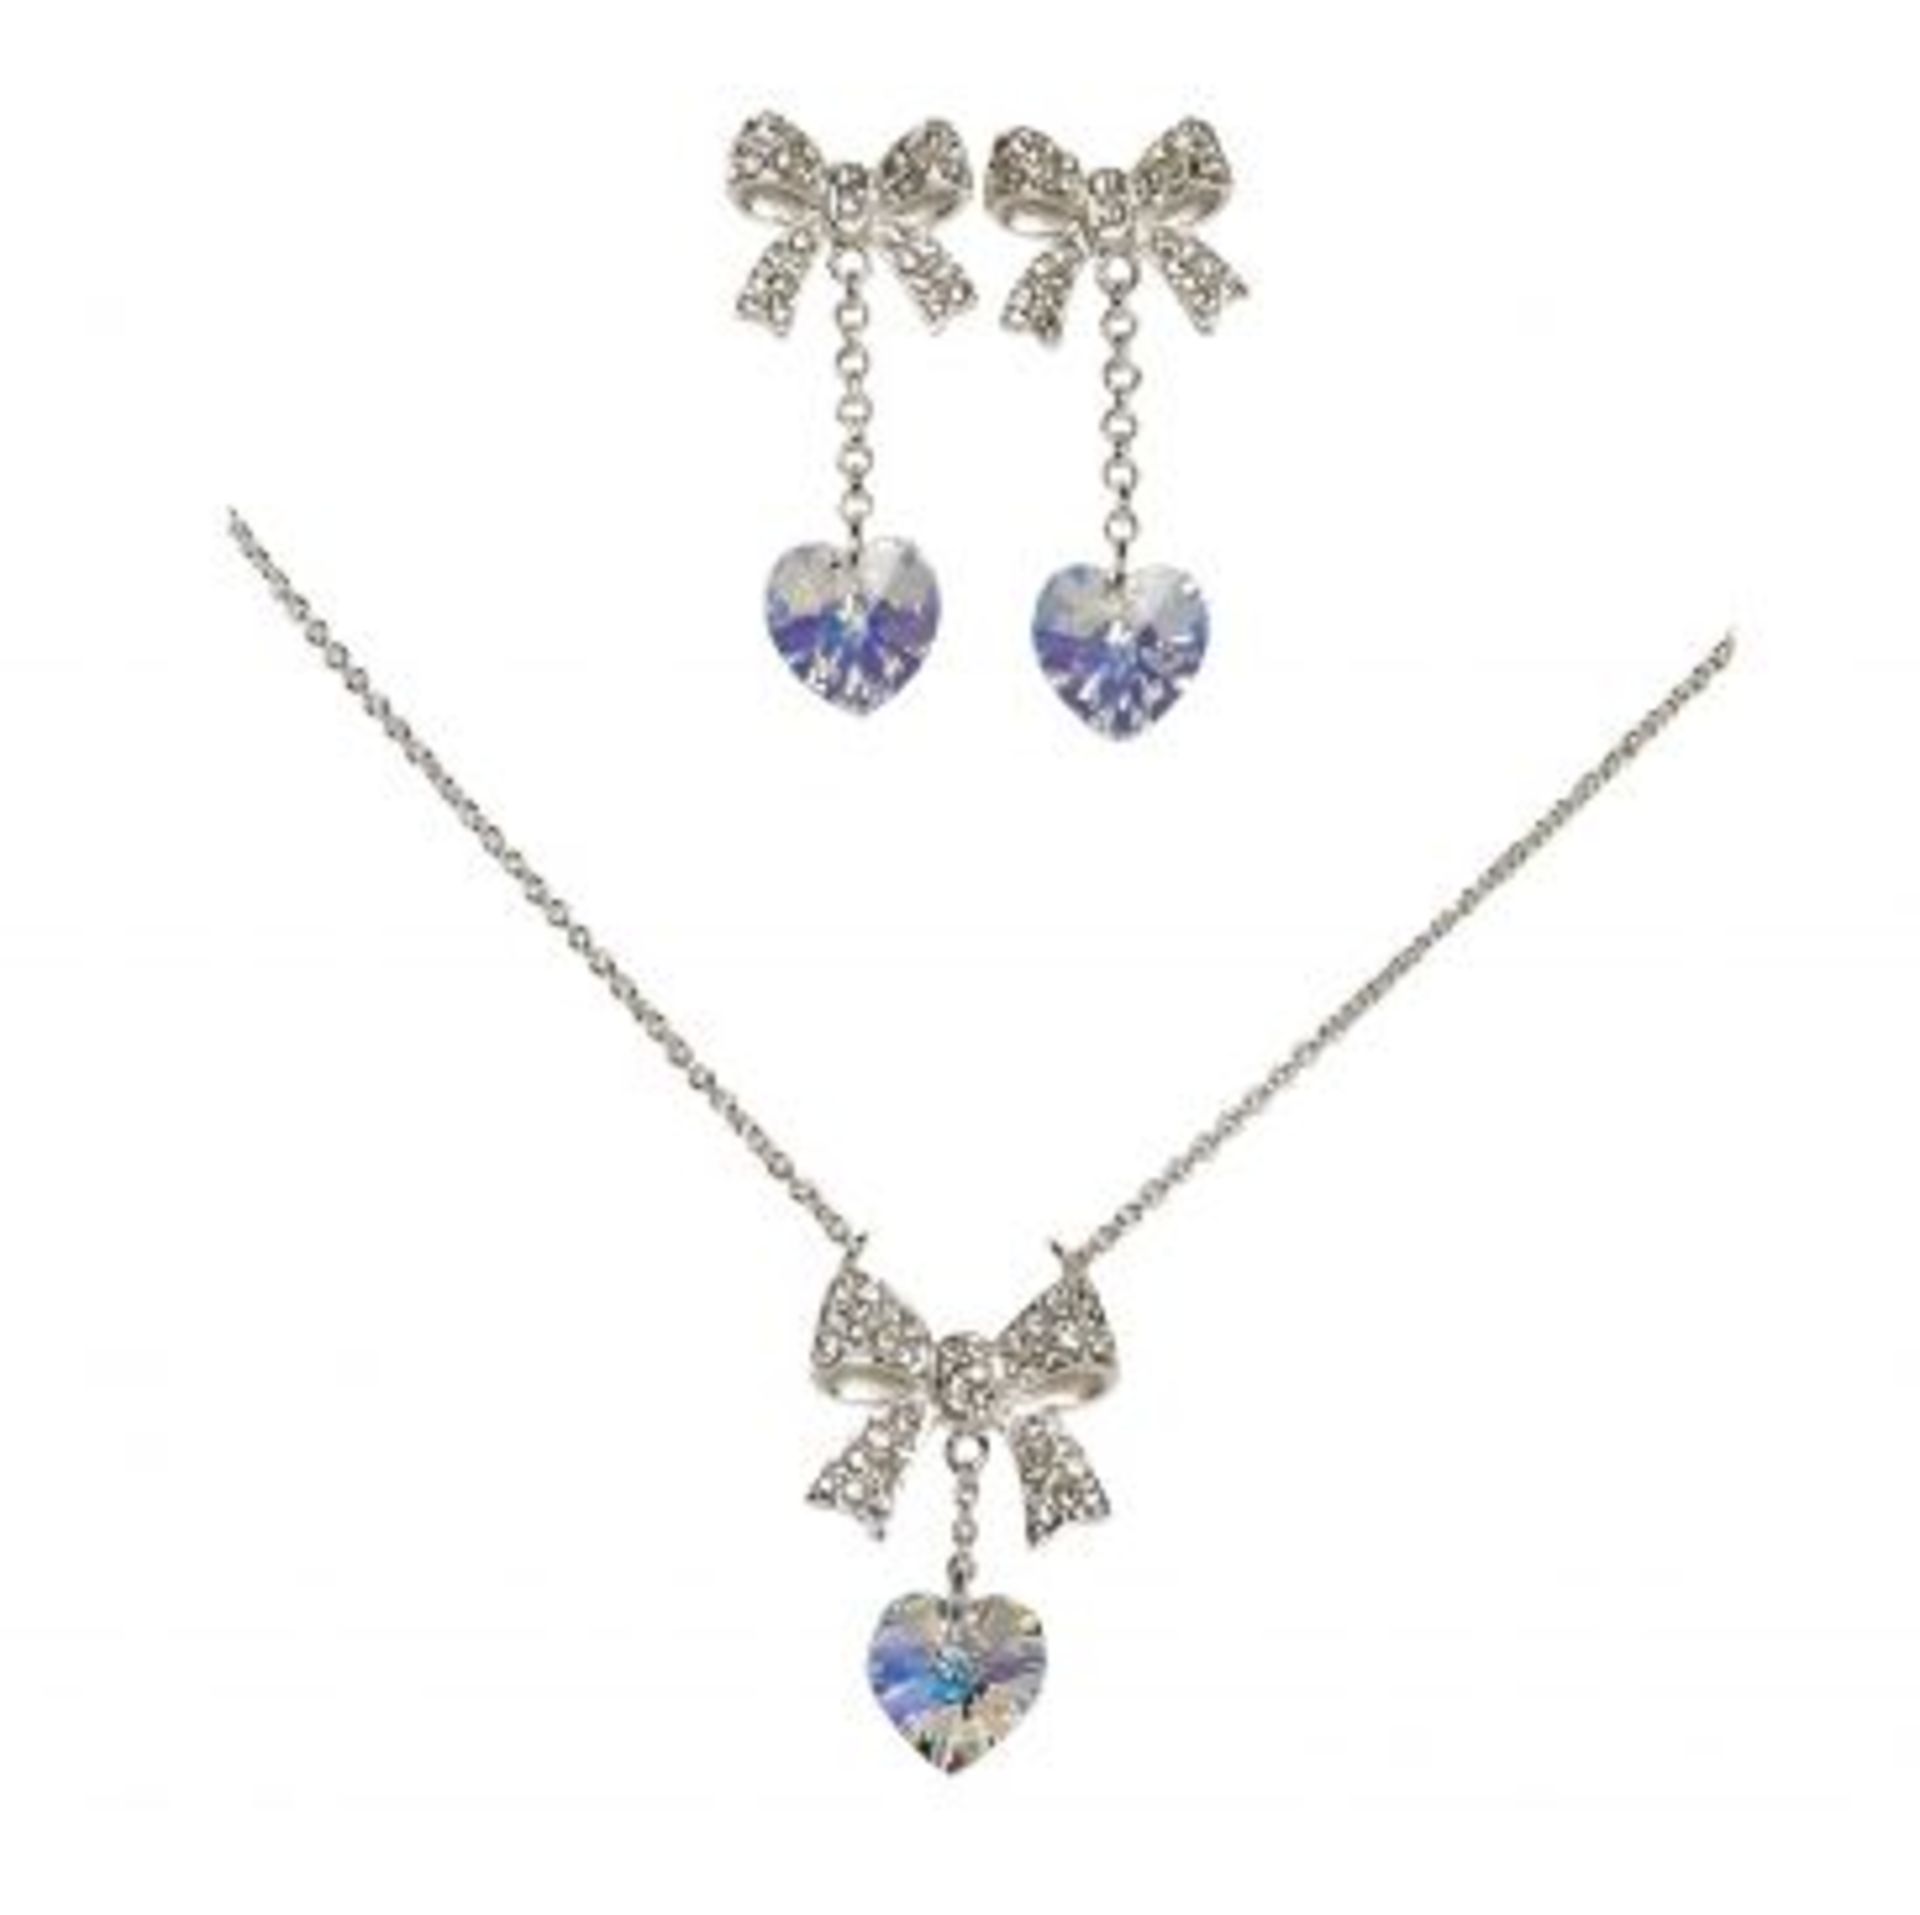 1 x HEART PENDANT AND EARRING SET By ICE London - EGJ-9900 - Silver-tone Curb Chain Adorned With - Image 2 of 2